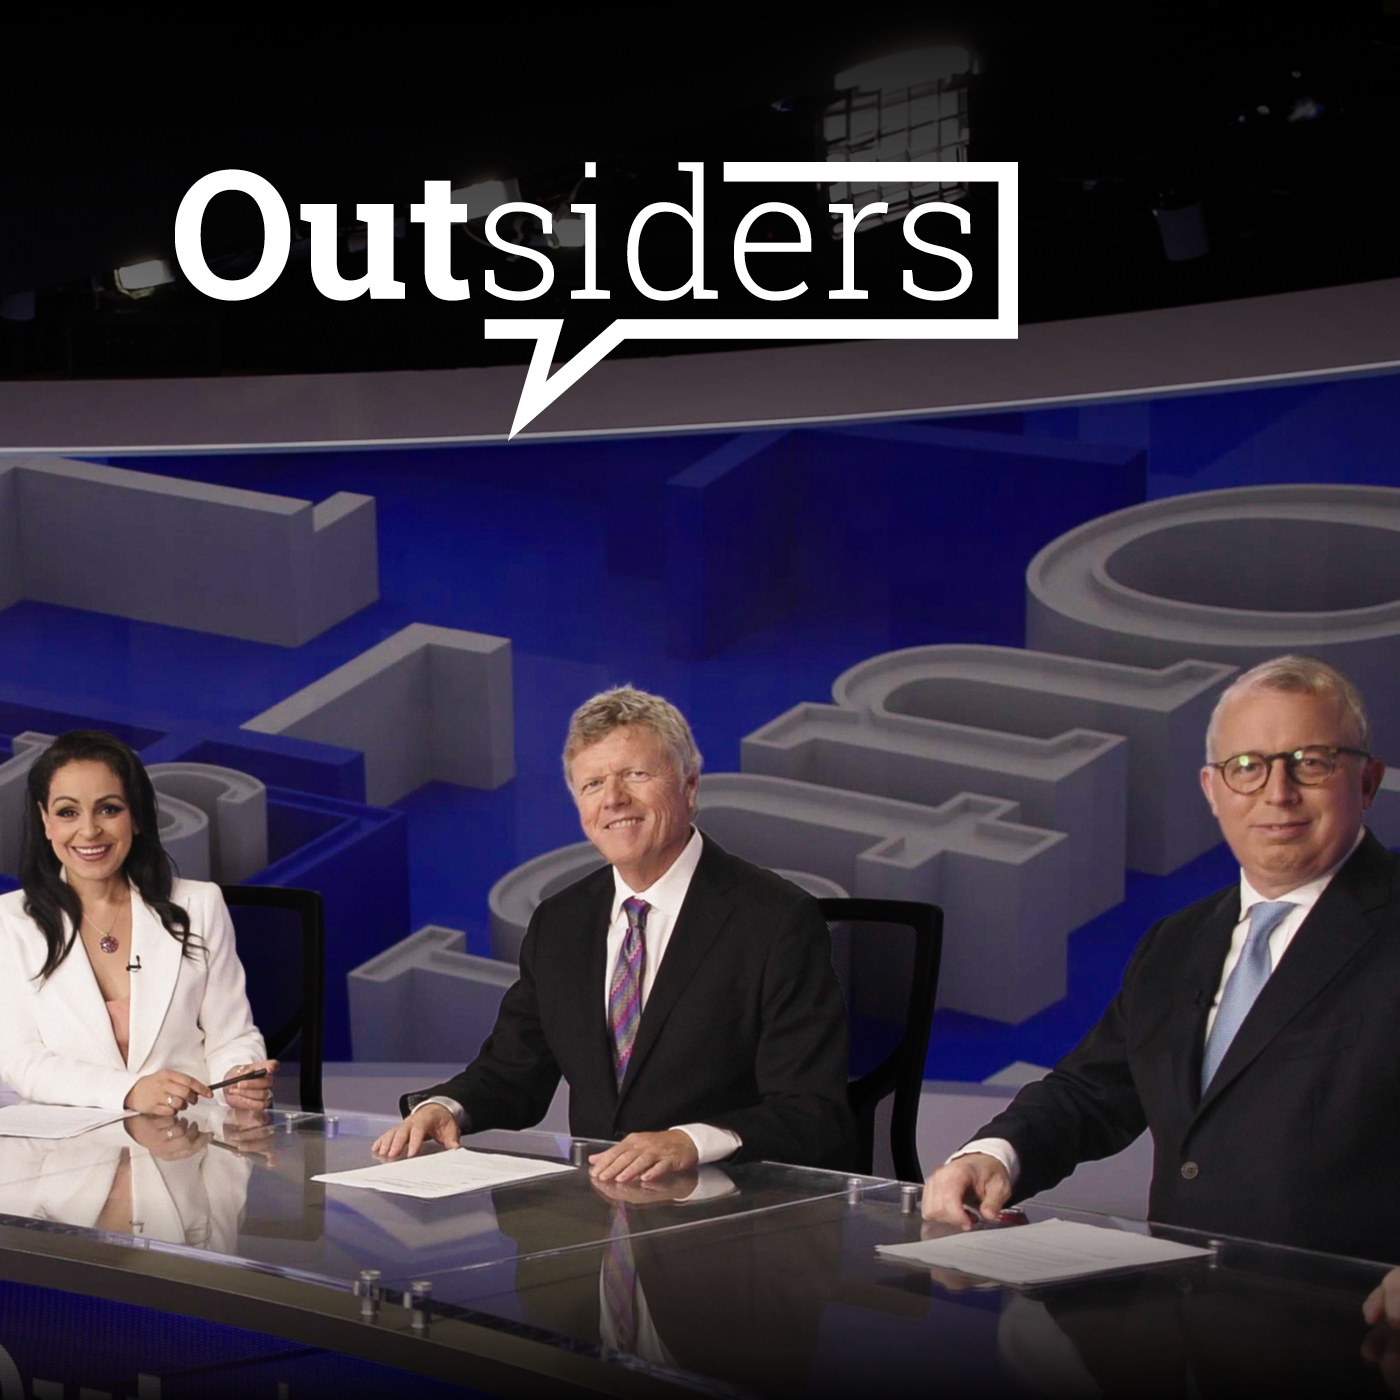 Outsiders, Sunday 28th March